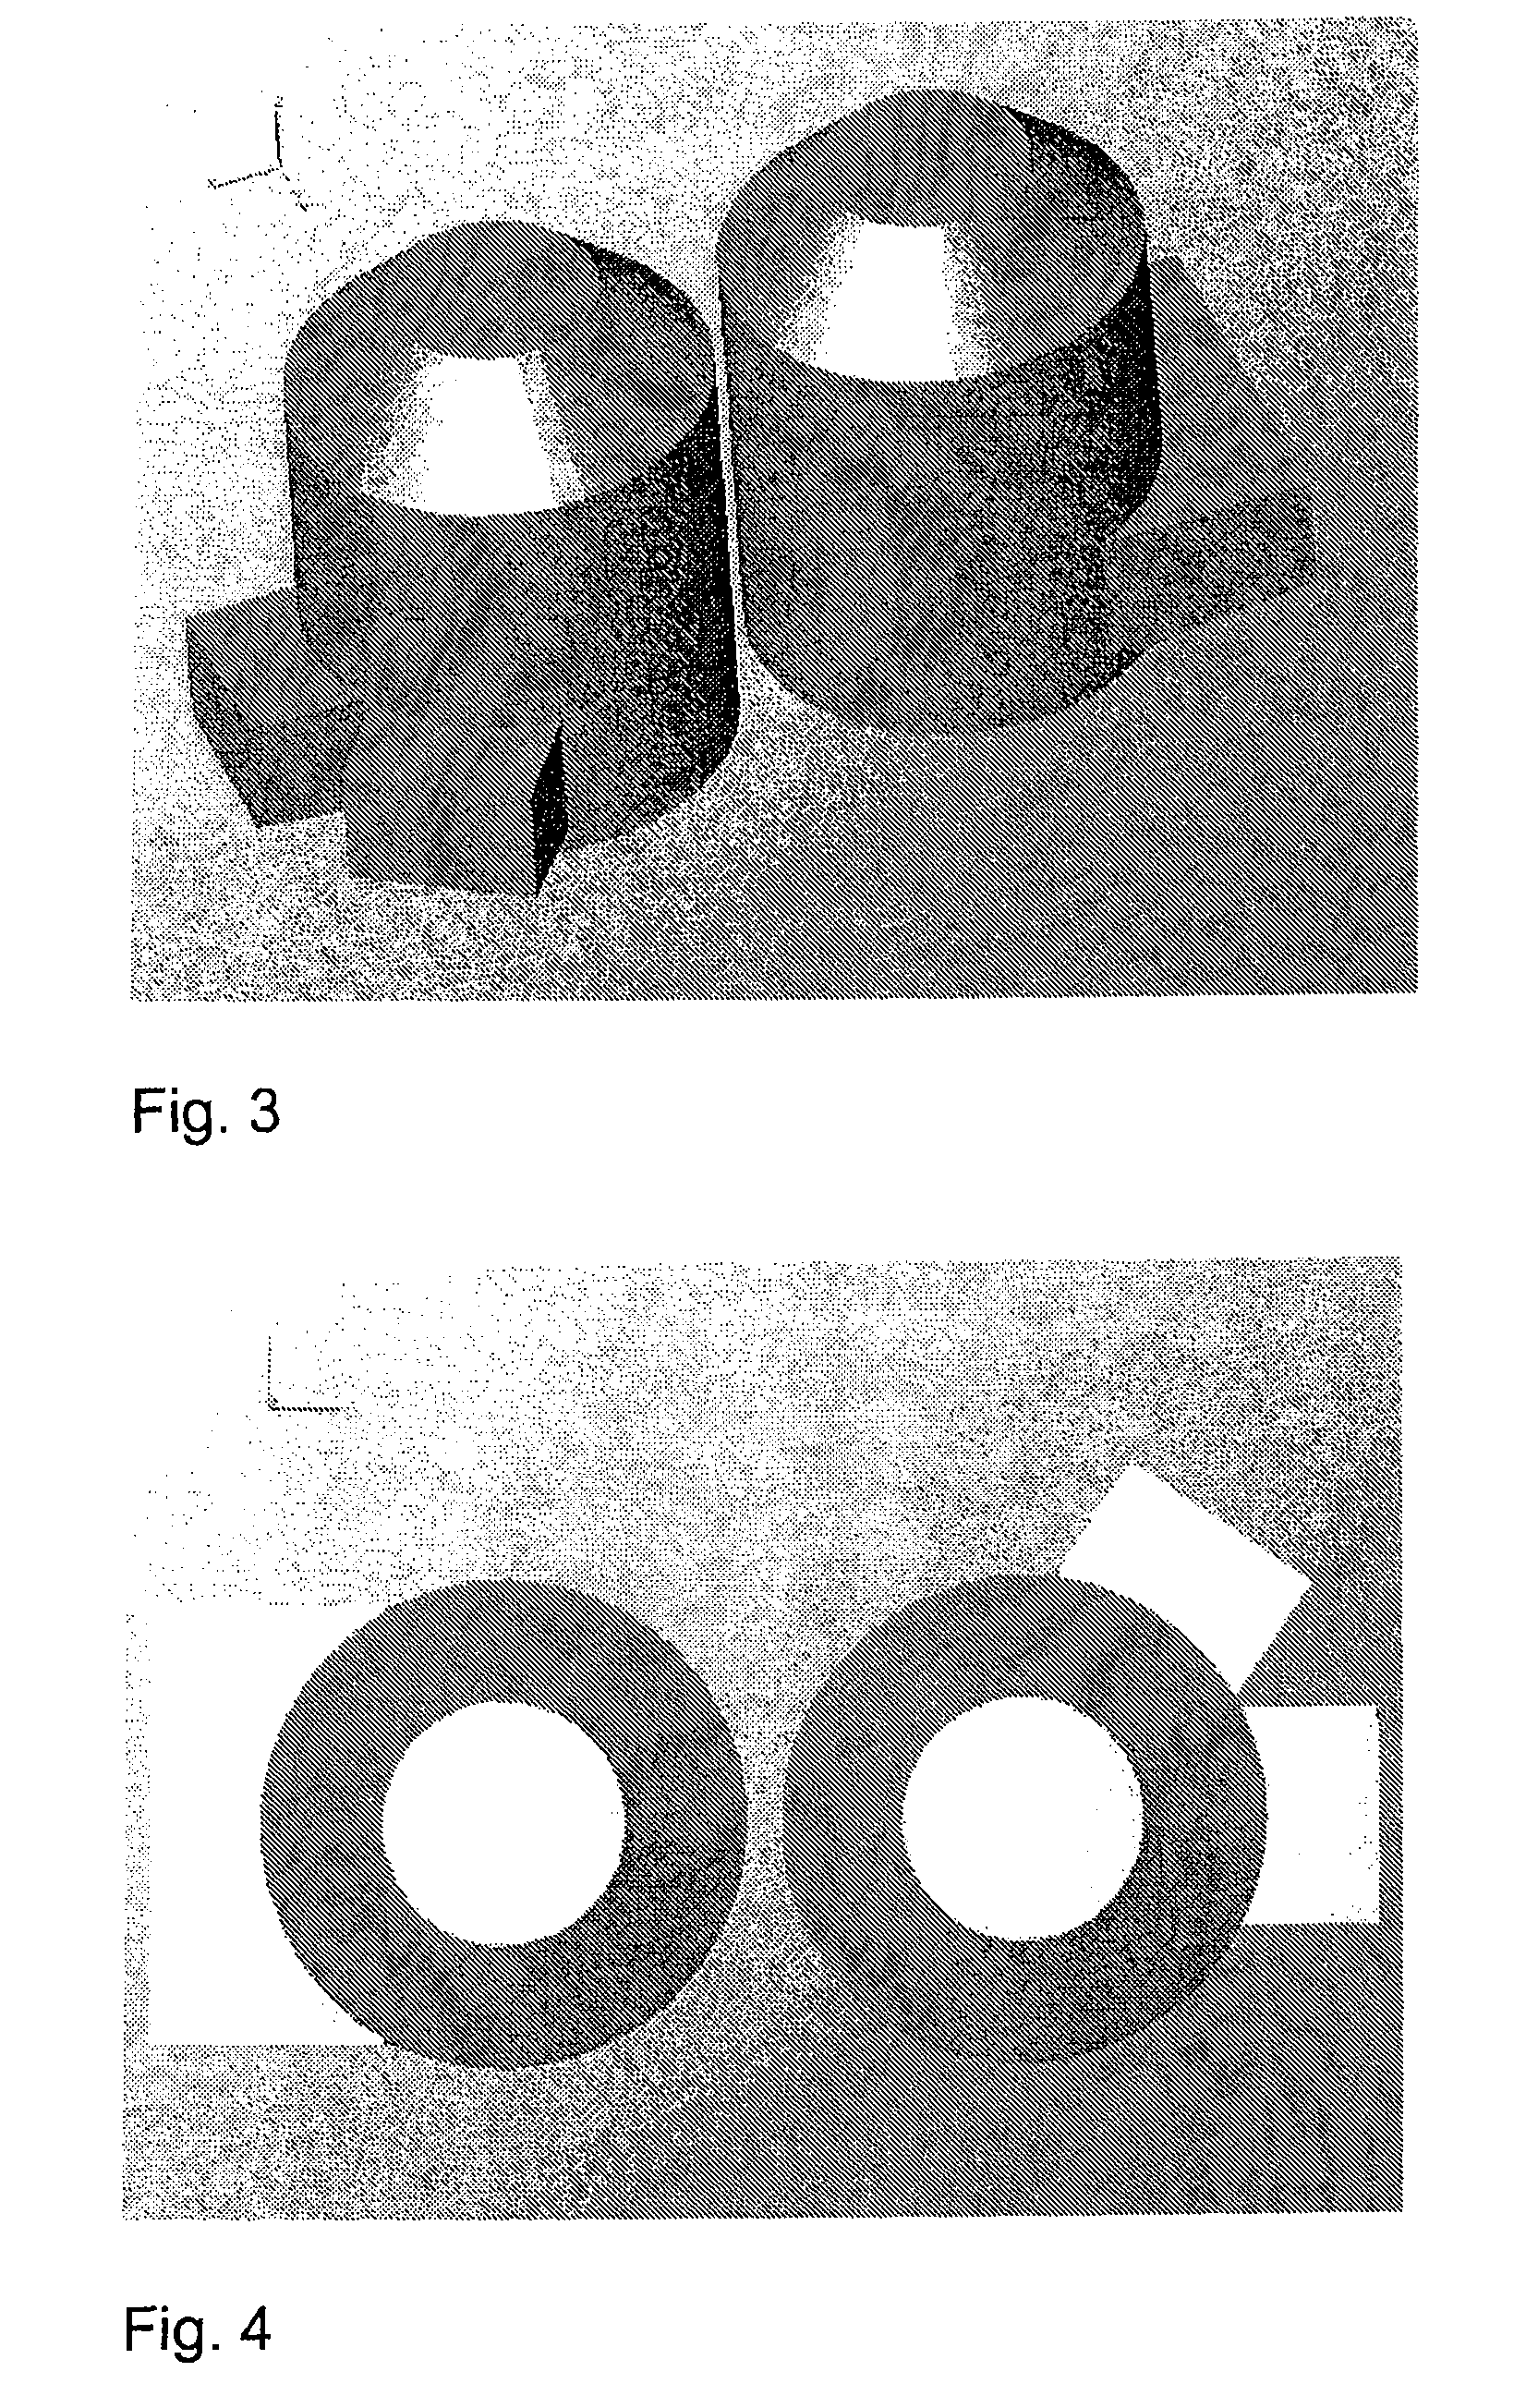 Method and spray tower for contacting gases and liquid droplets for mass and/or heat transfer